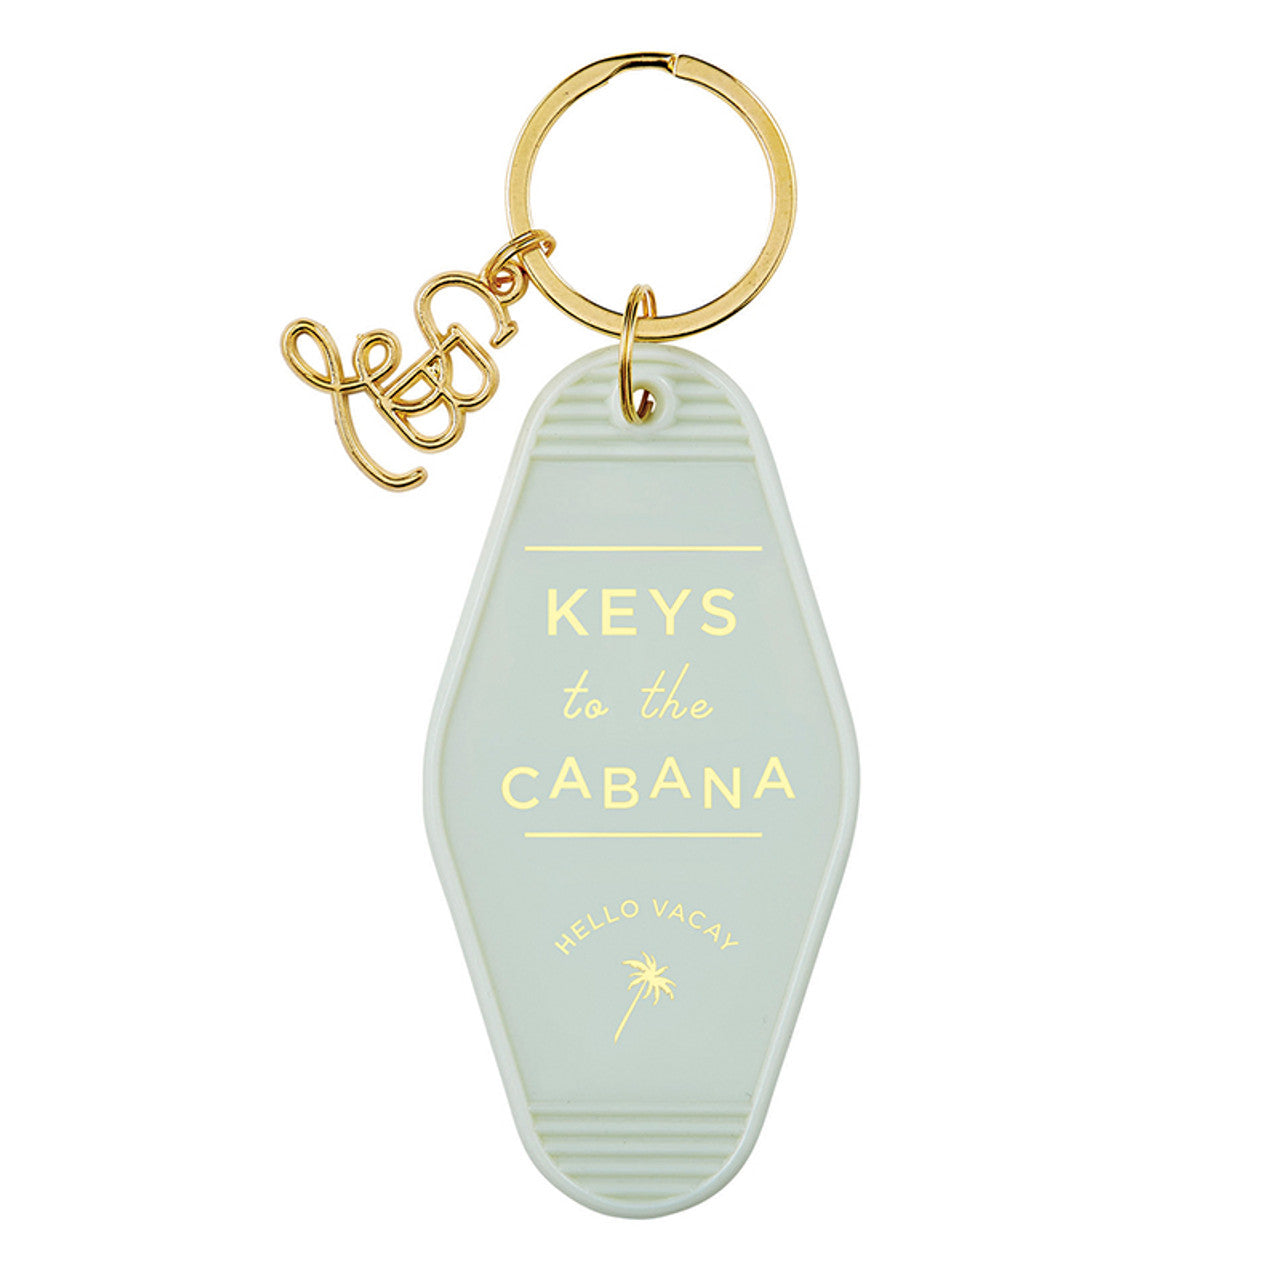 Keys To The Cabana Keychain In Key Lime